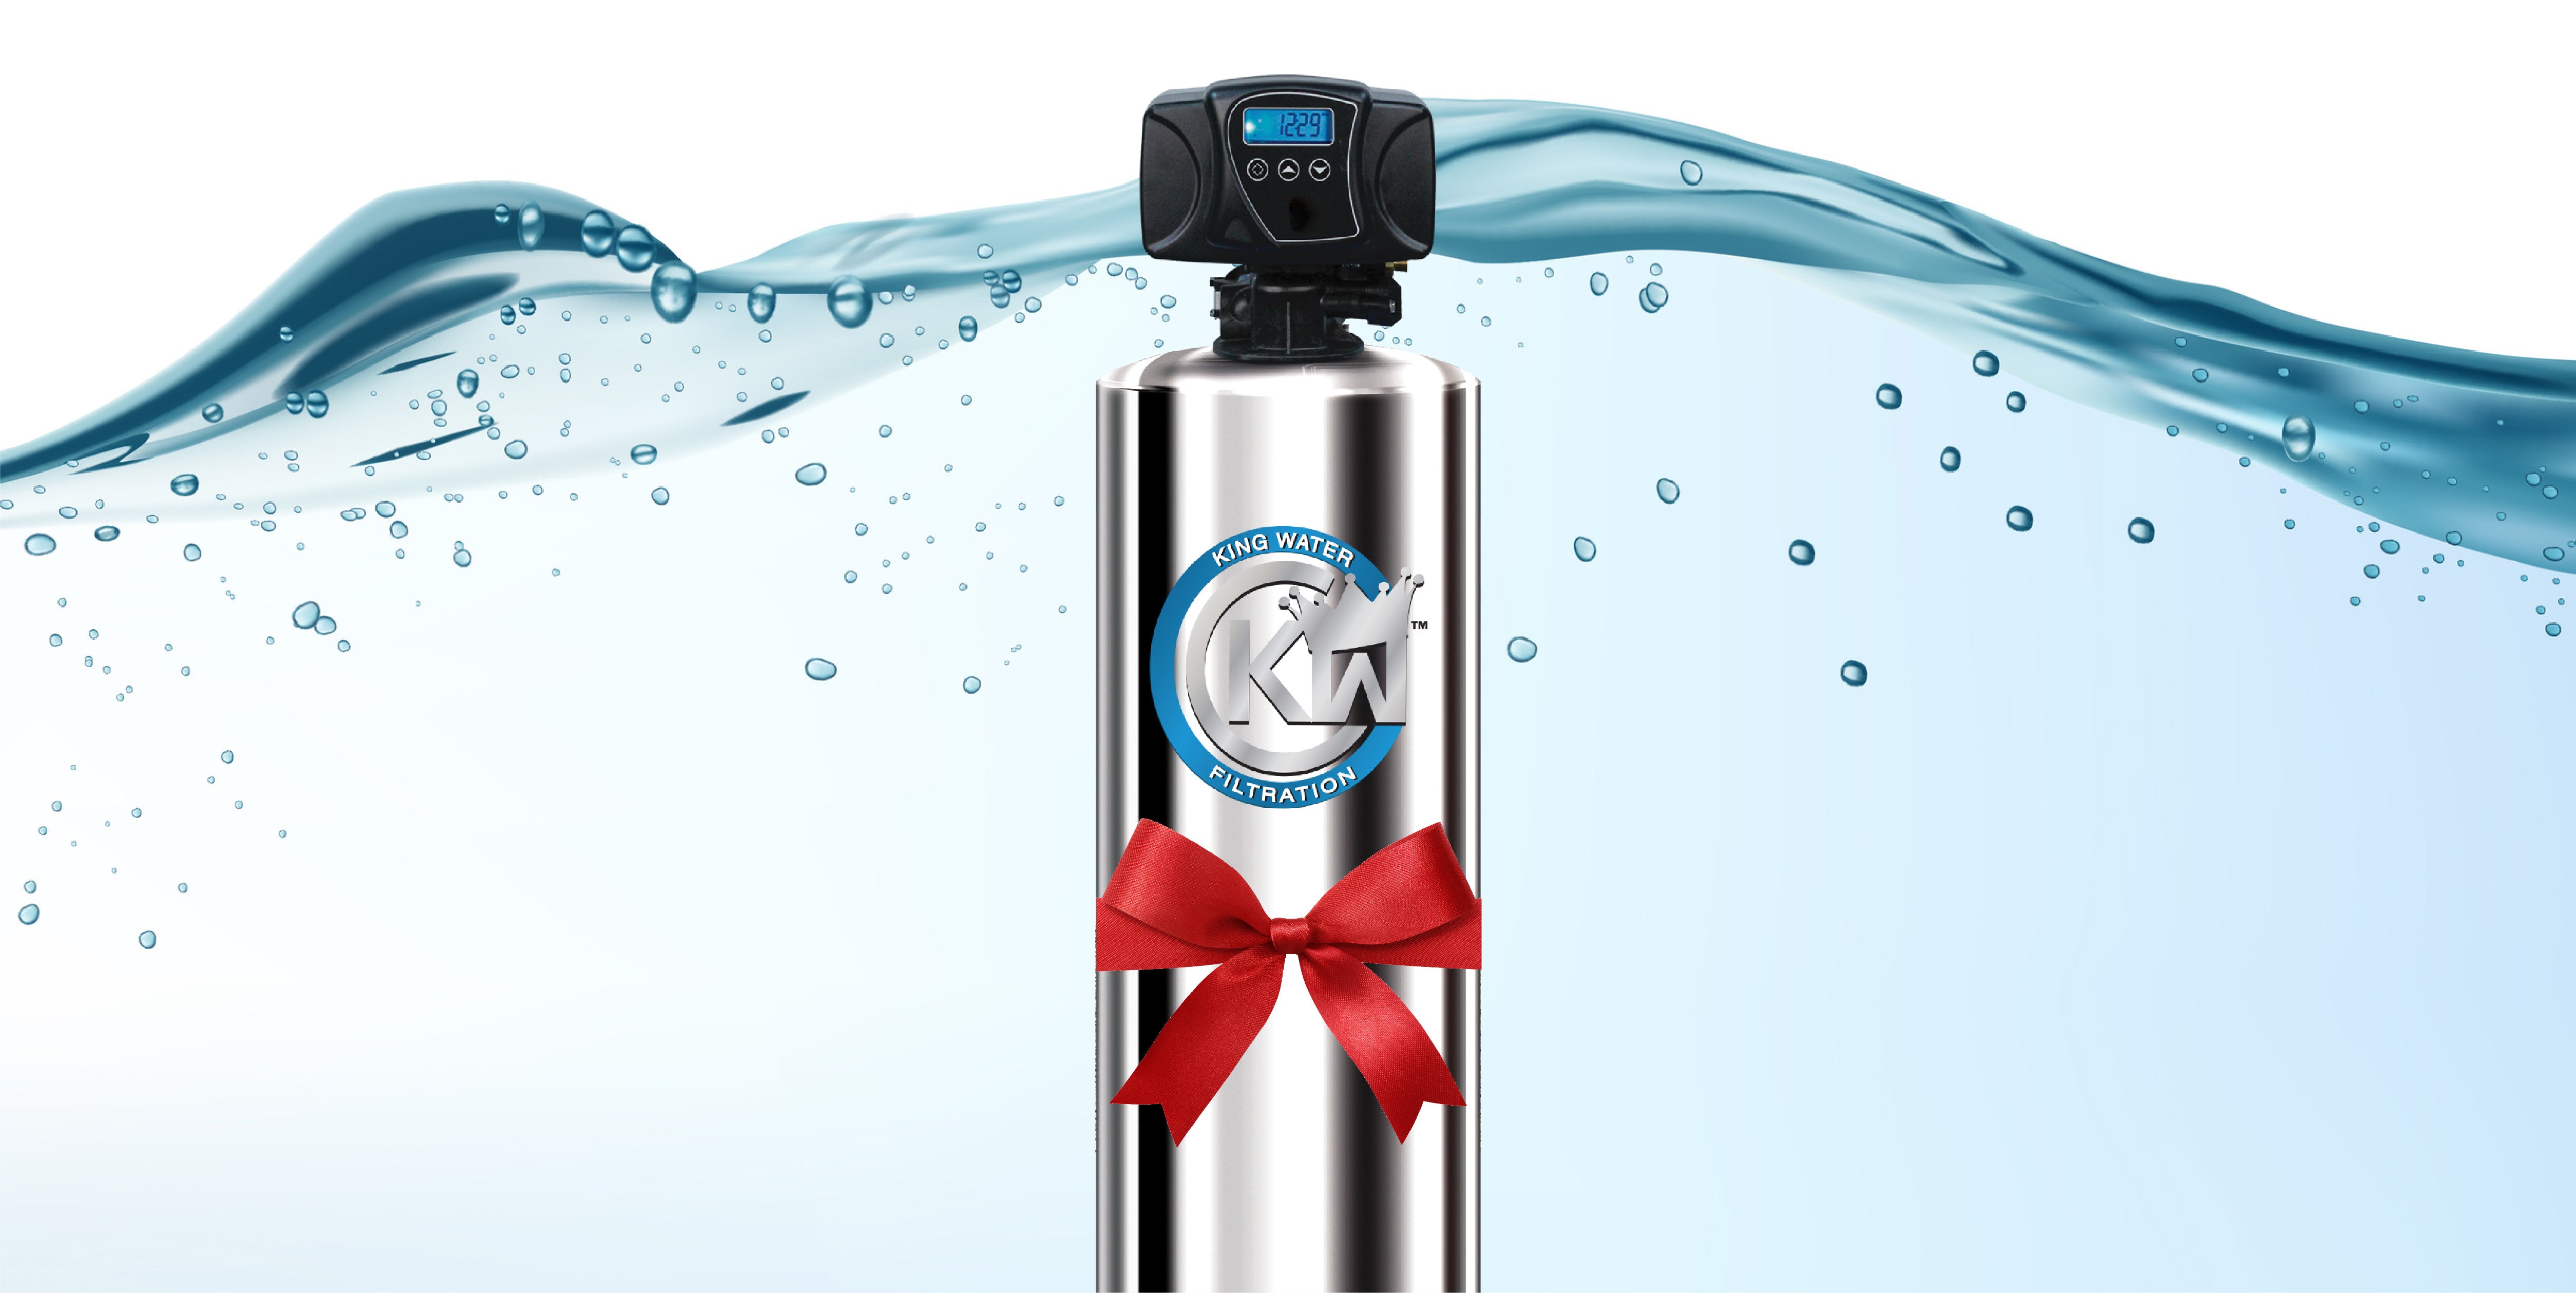 The Gift of Clean Water: 10 Reasons to Gift a King Water Filtration System this Holiday Season